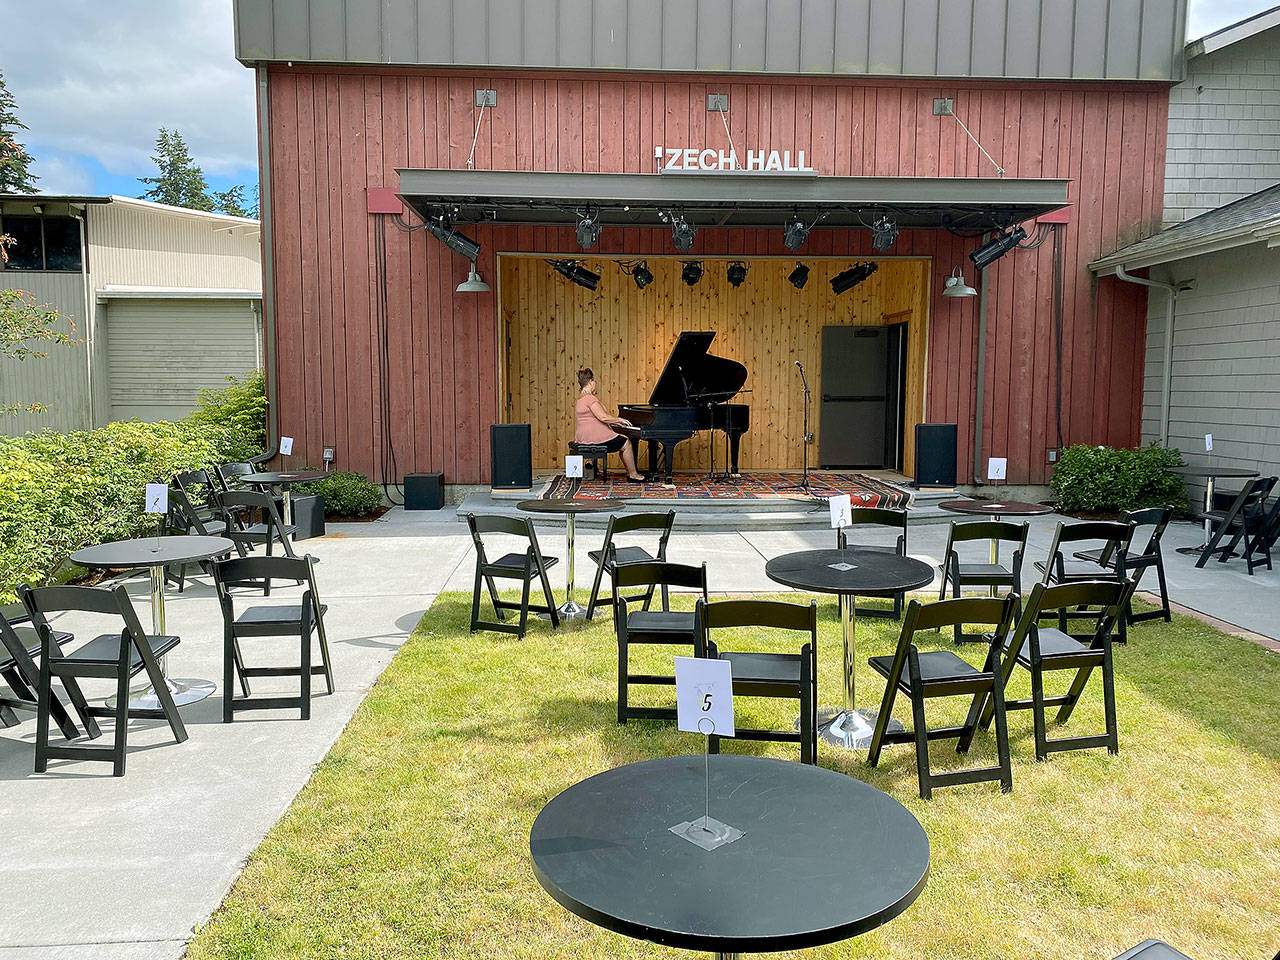 Photo provided                                Pianist Sheila Weidendorf practices a set on the newly renovated Zech Patio at Whidbey Island Center for the Arts in Langley. The venue has announced plans for summer performances. See page 9 for more on this story.